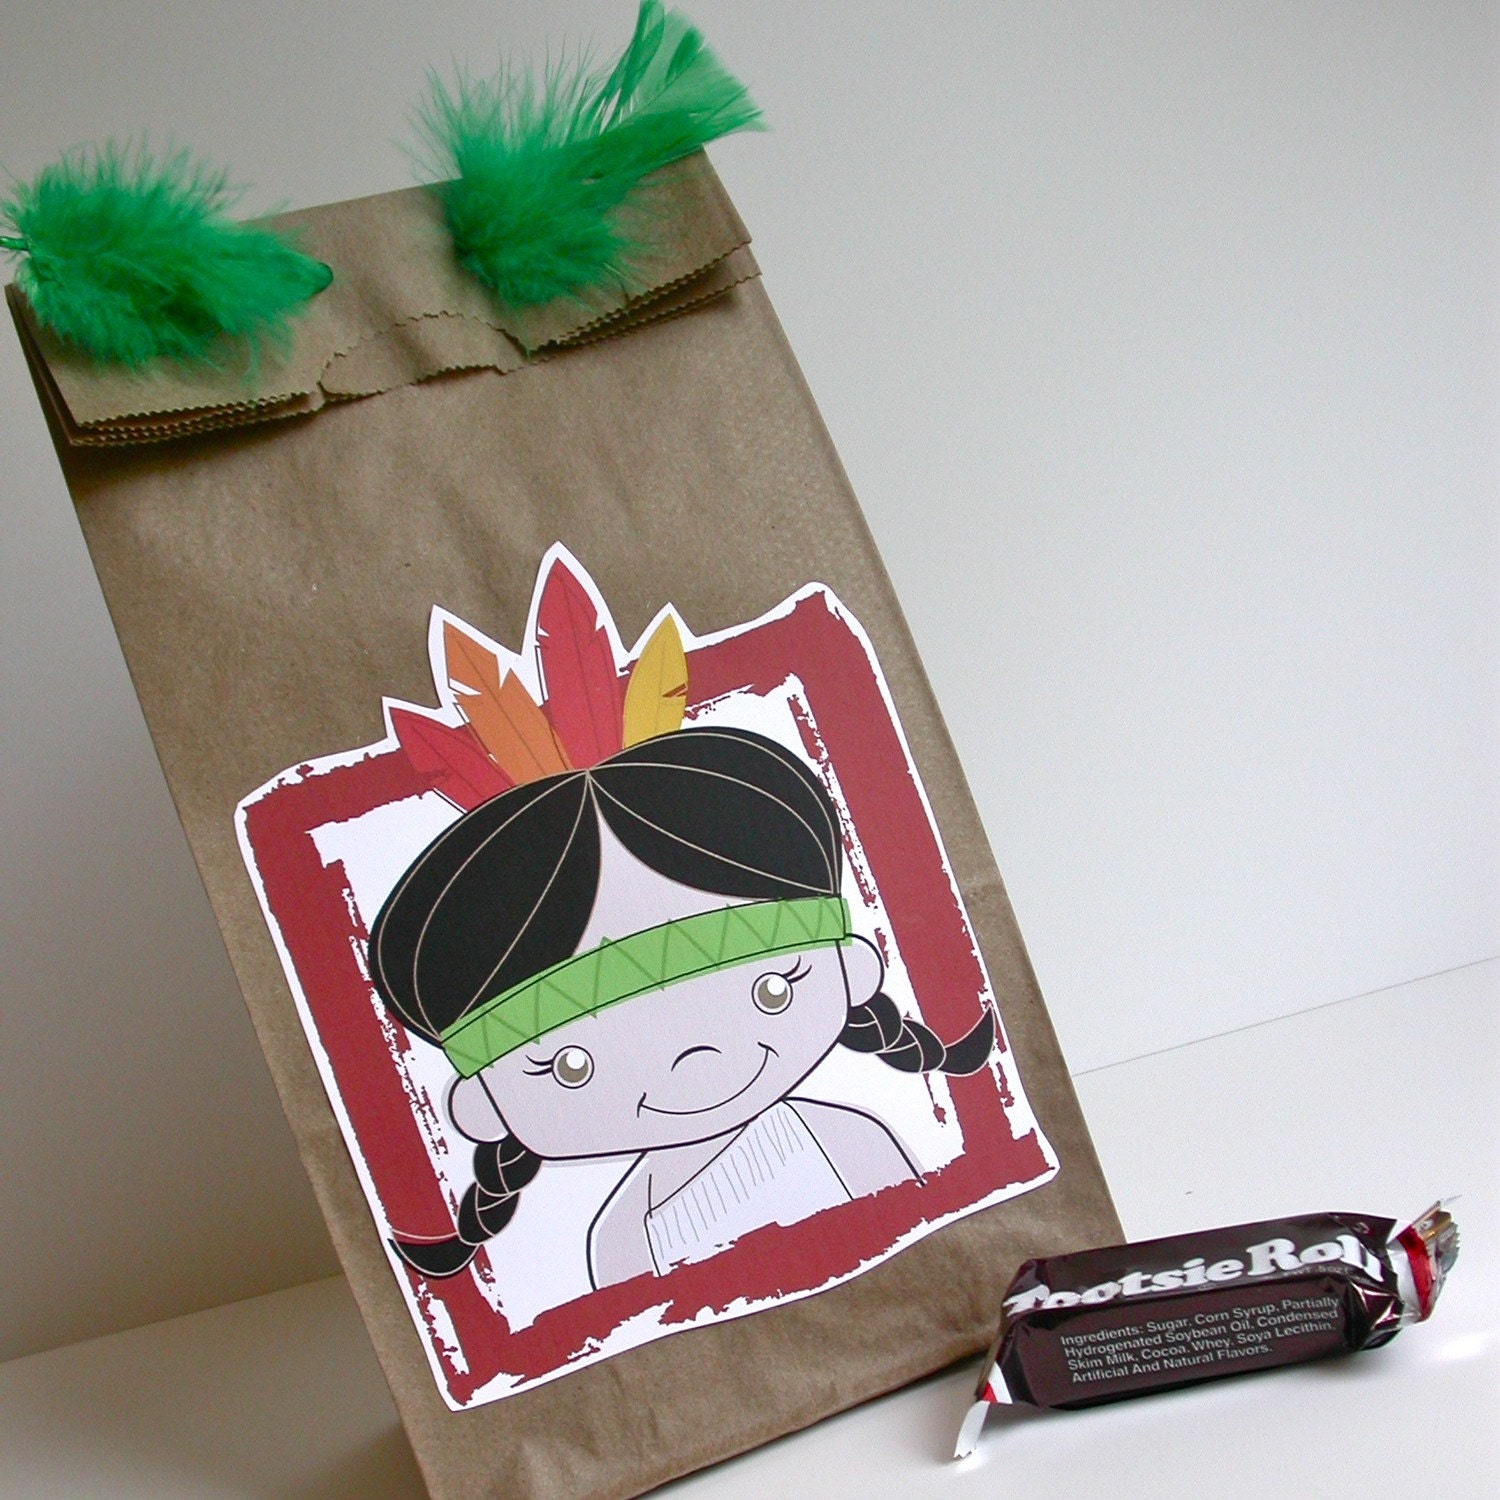 Indian Party Goodie Bags by designlab443 on Etsy